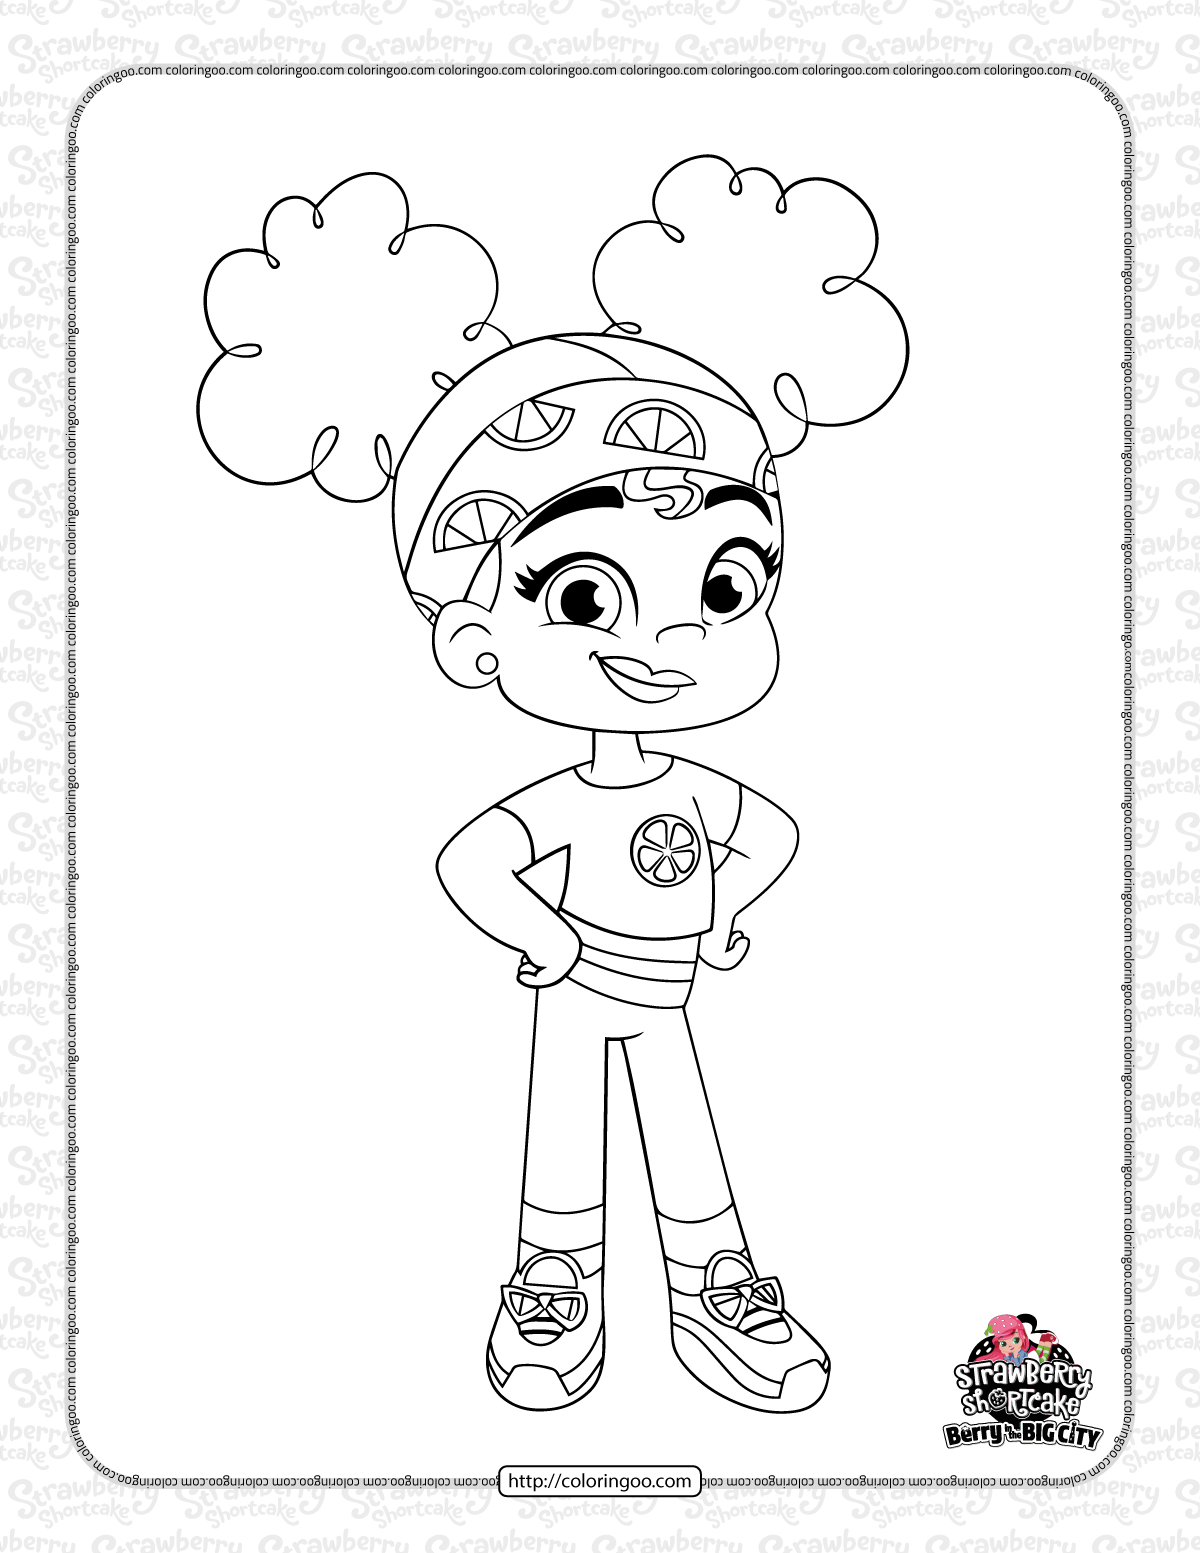 orange blossom and pupcake coloring pages